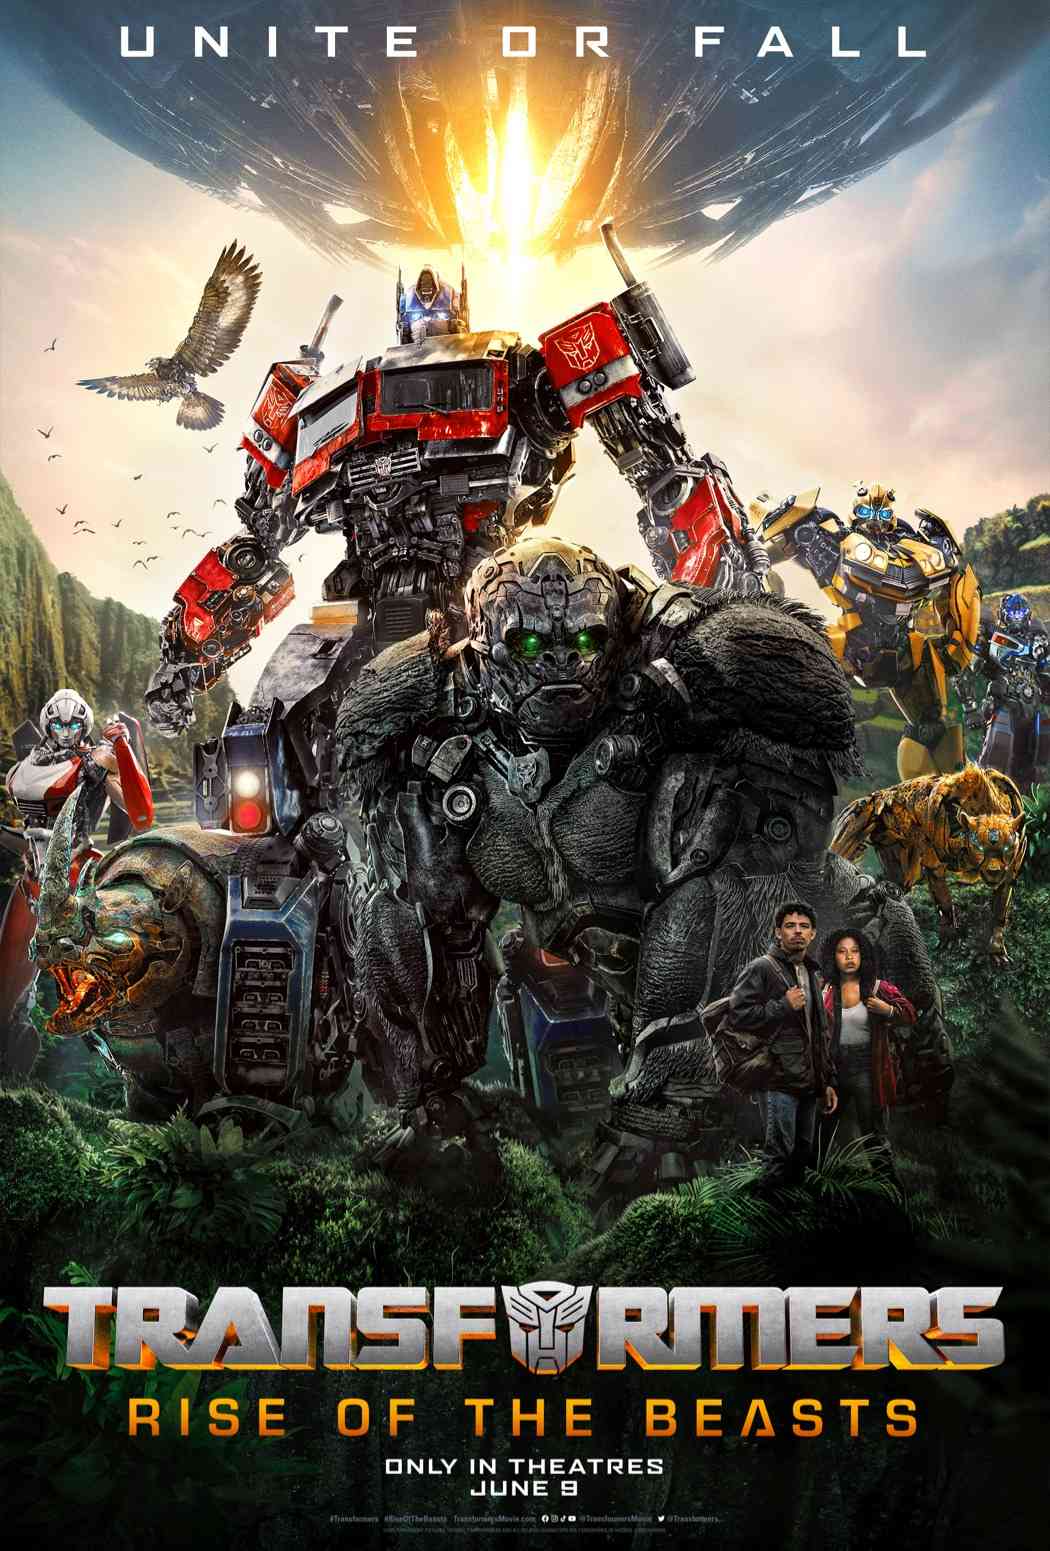 Transformers: Rise of the Beasts Plot Synopsis